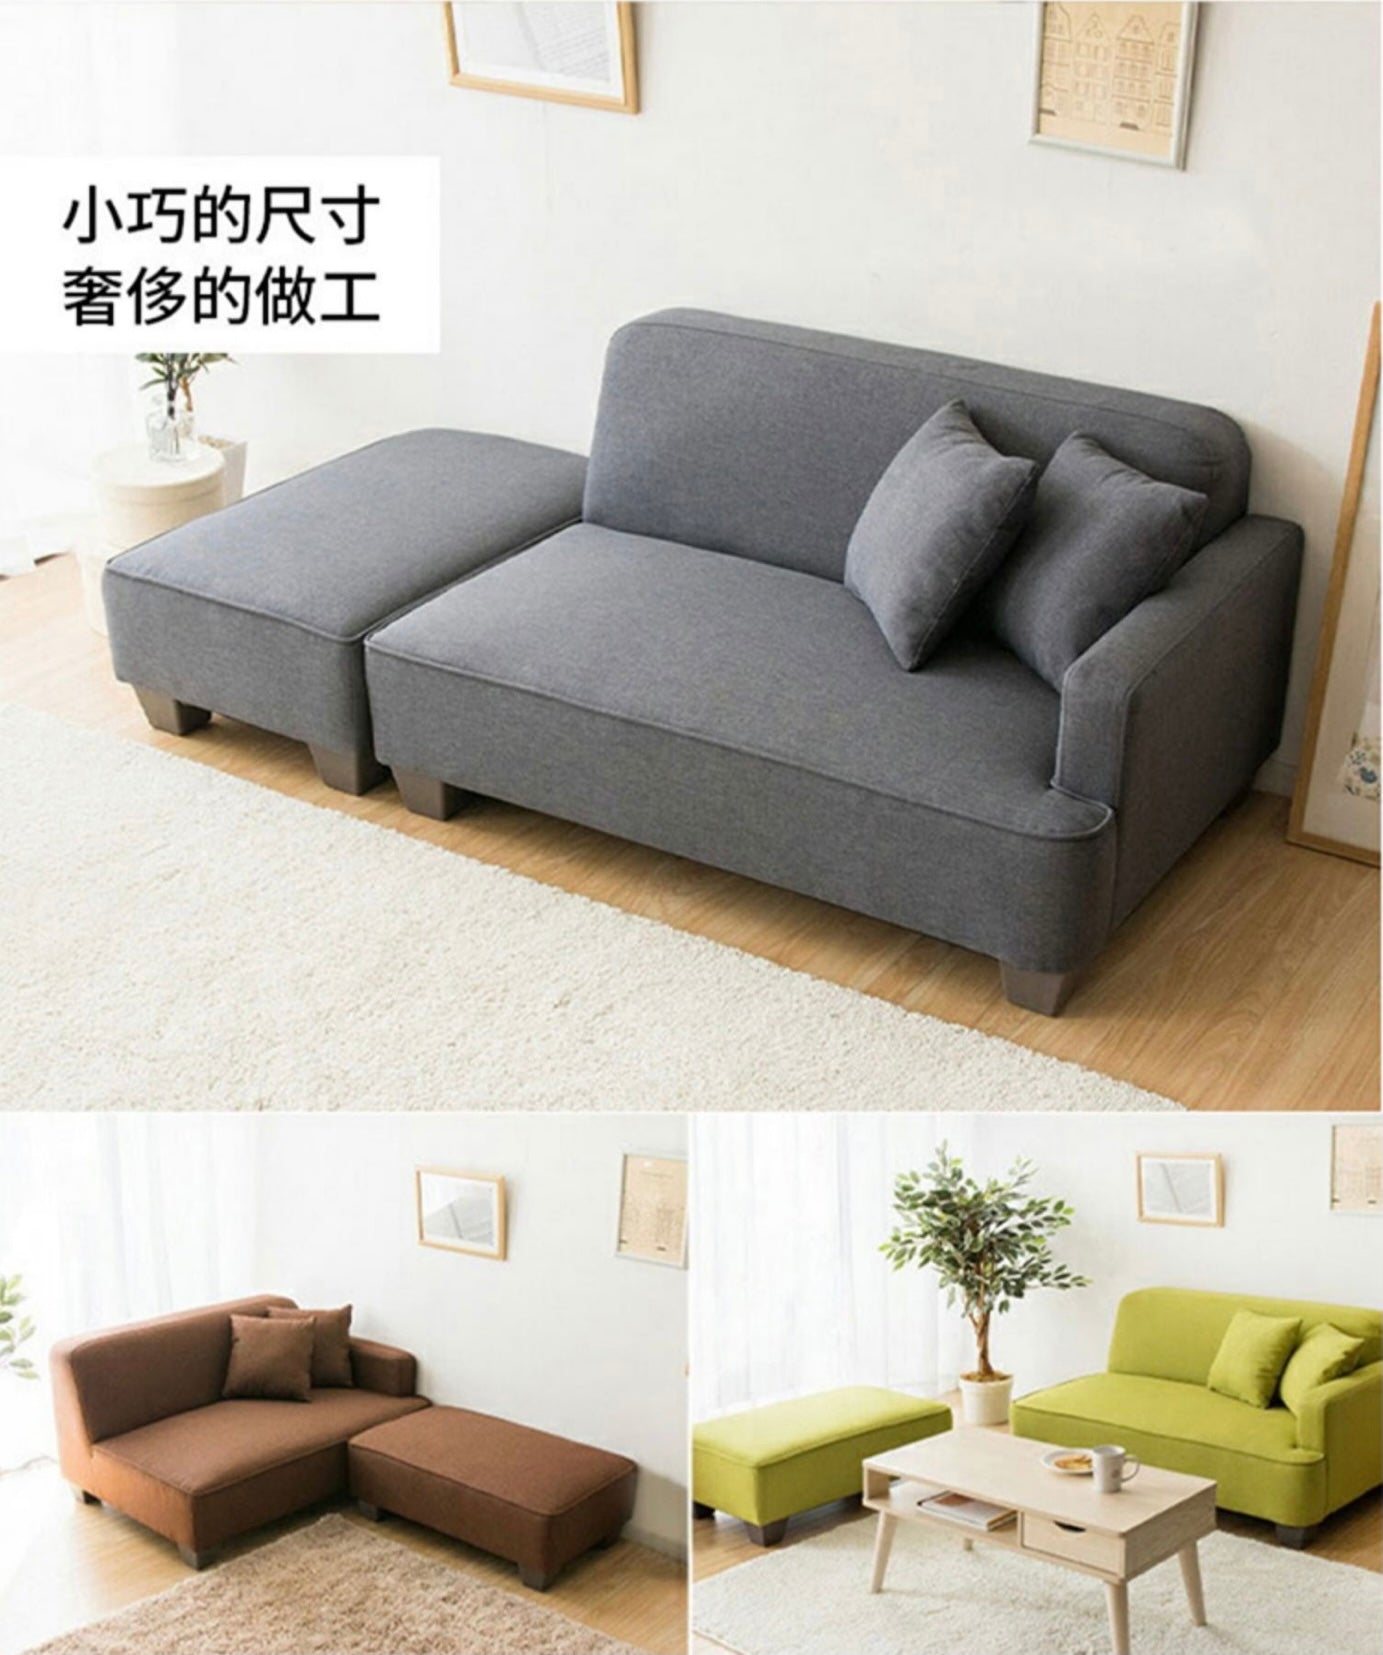 758 TÖGO Japanese style sofa with footrest 